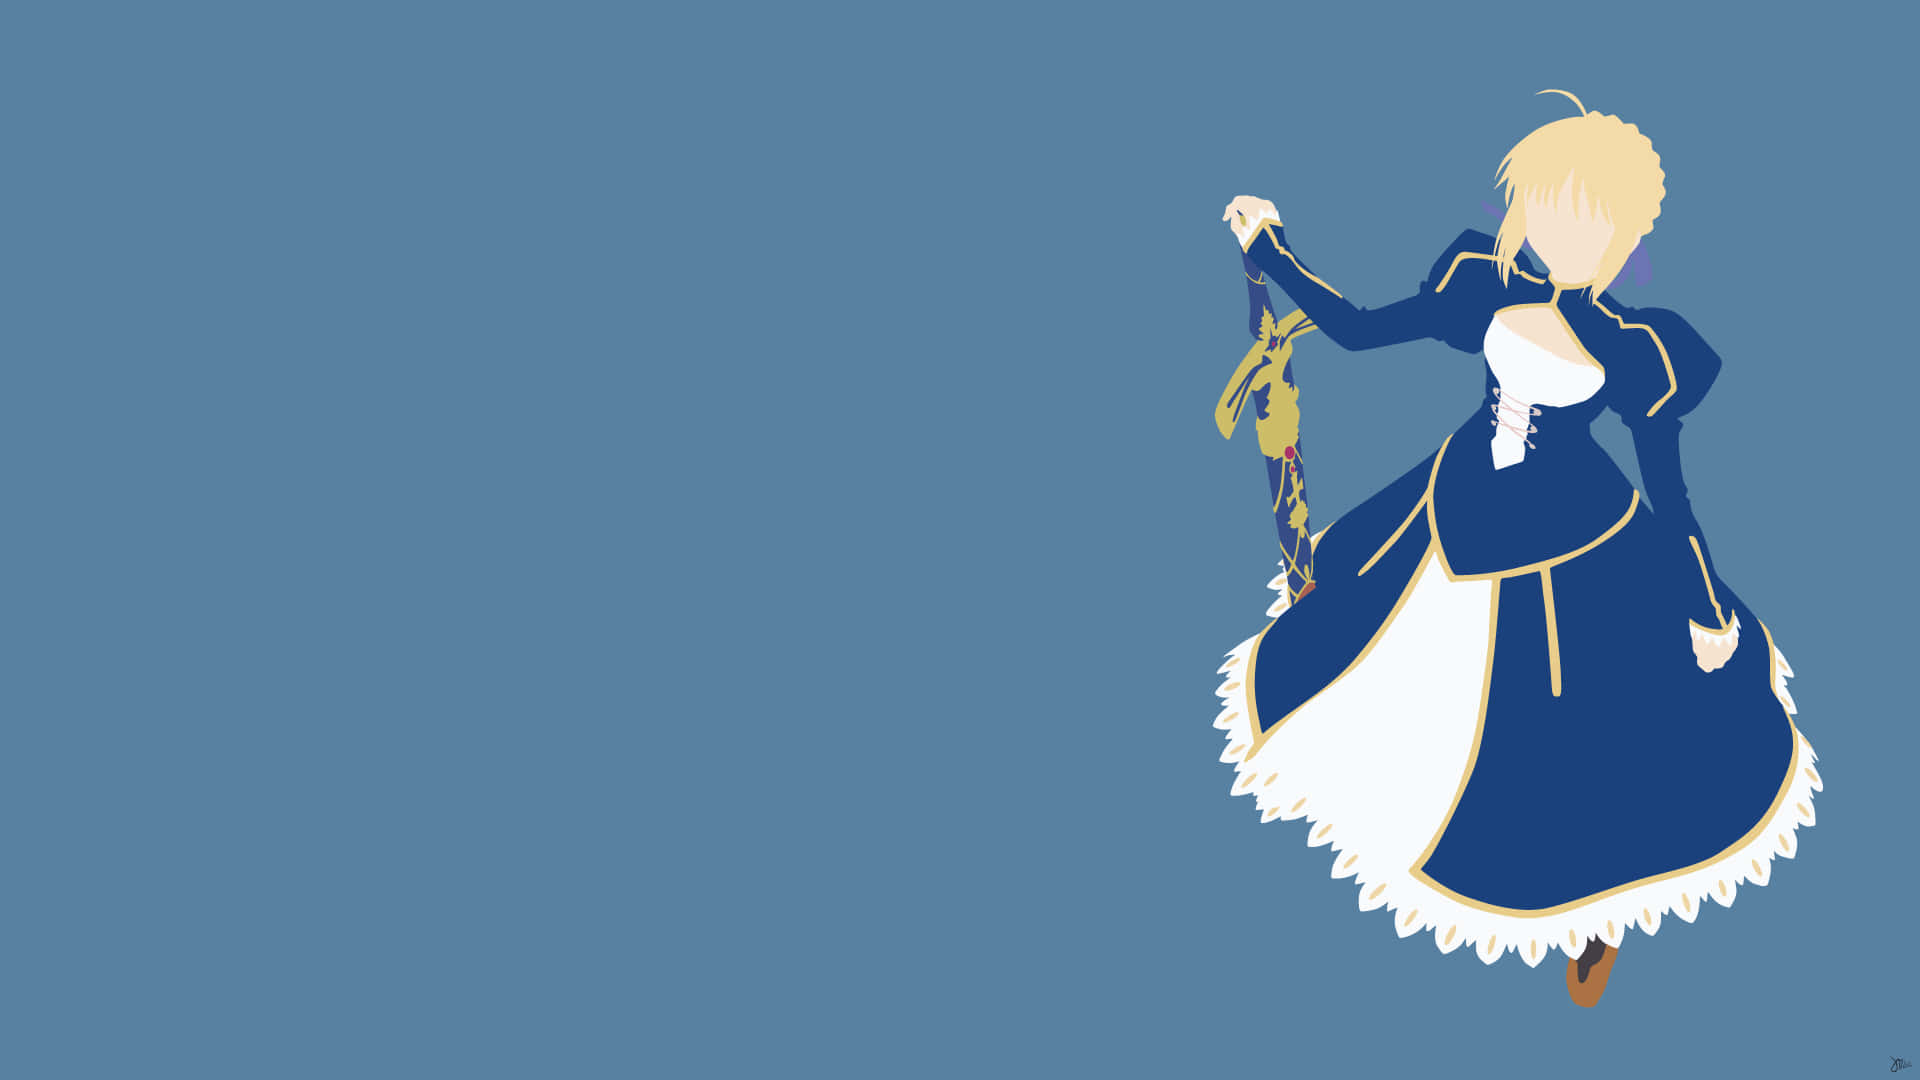 Saber Fate Stay Night Vector In Blue Wallpaper